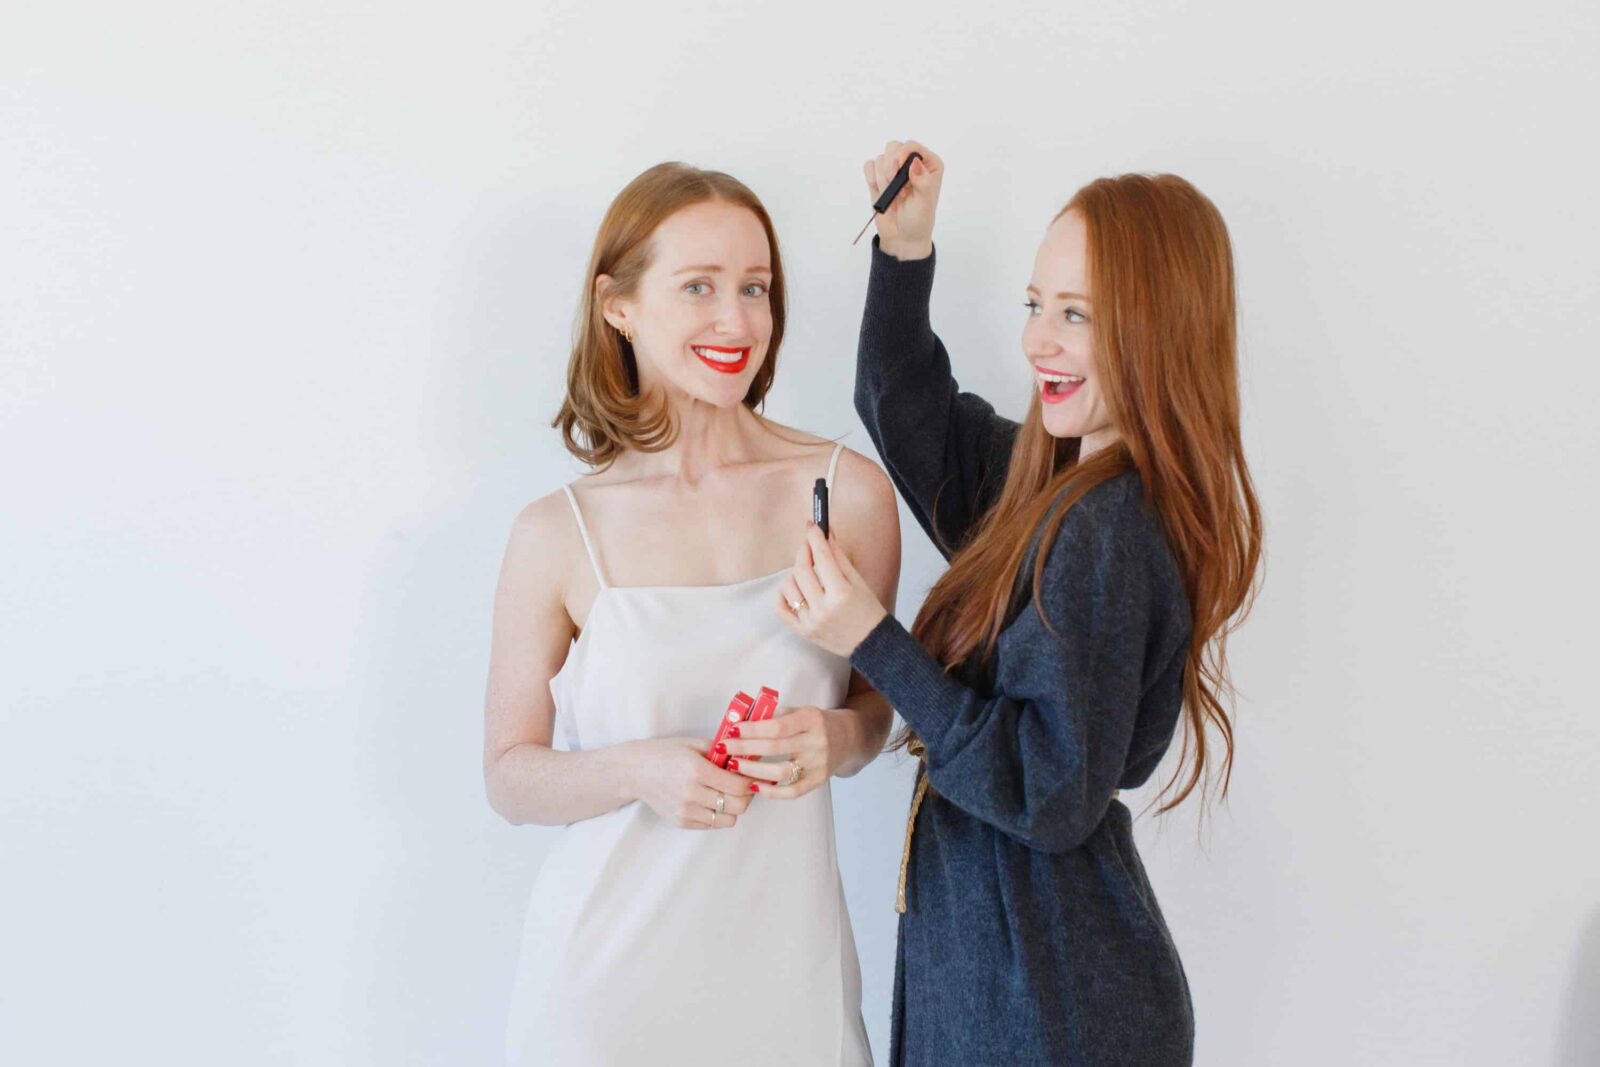 HOW TO BE A REDHEAD TURNS 11: THE 11 BEST MOMENTS